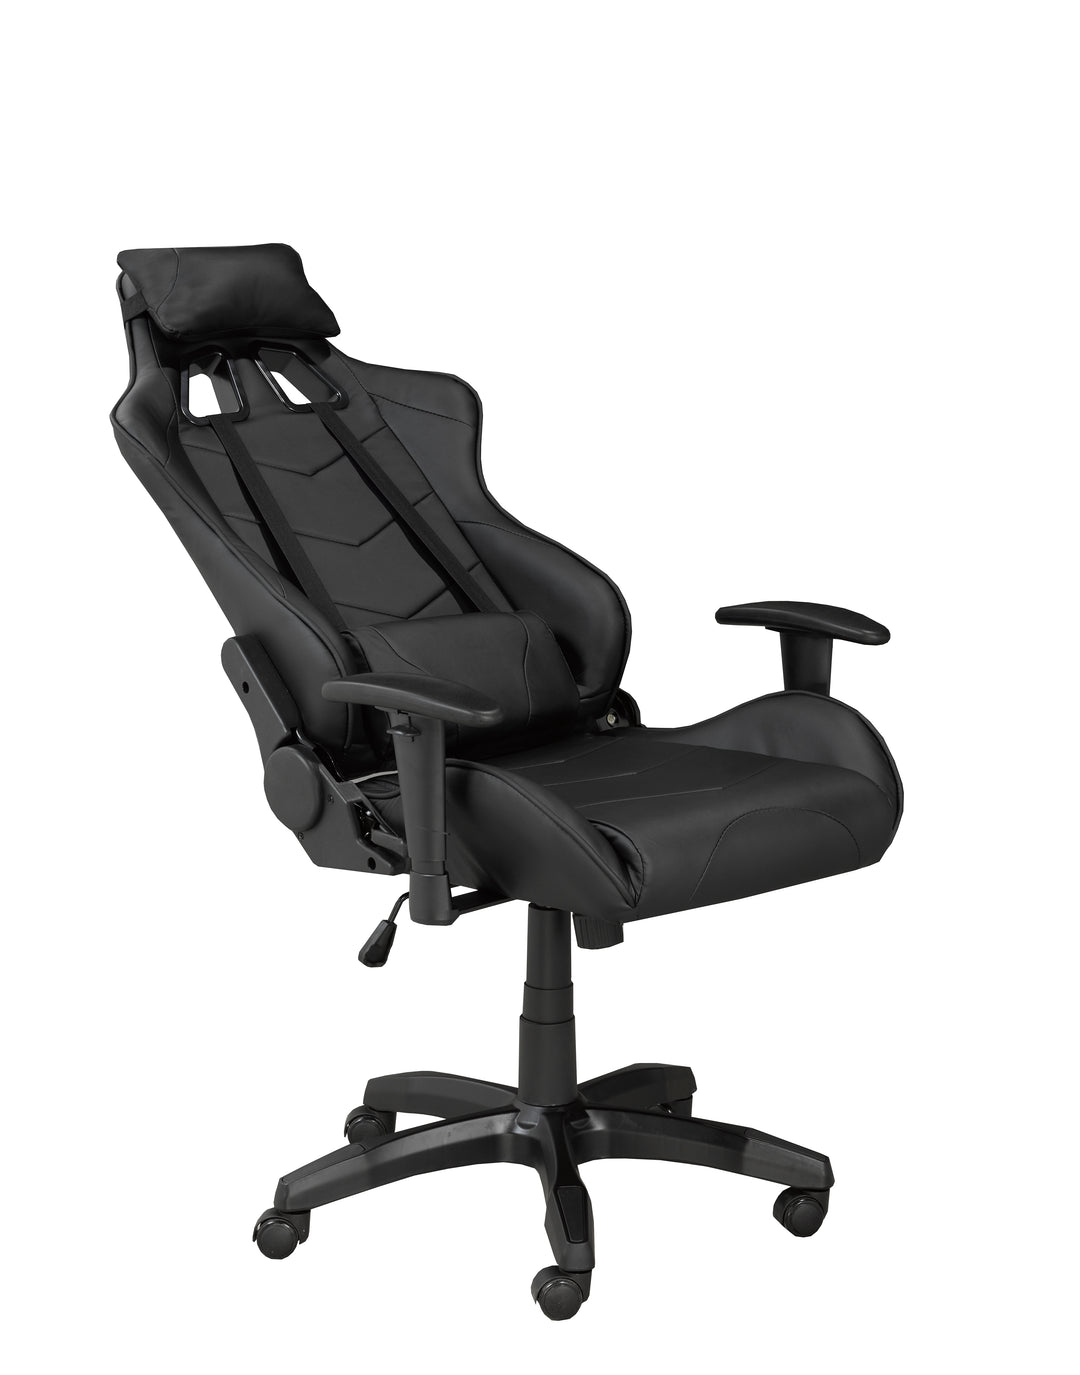 Professional Gaming Chair - Enhanced Comfort and Performance - Midnight Black